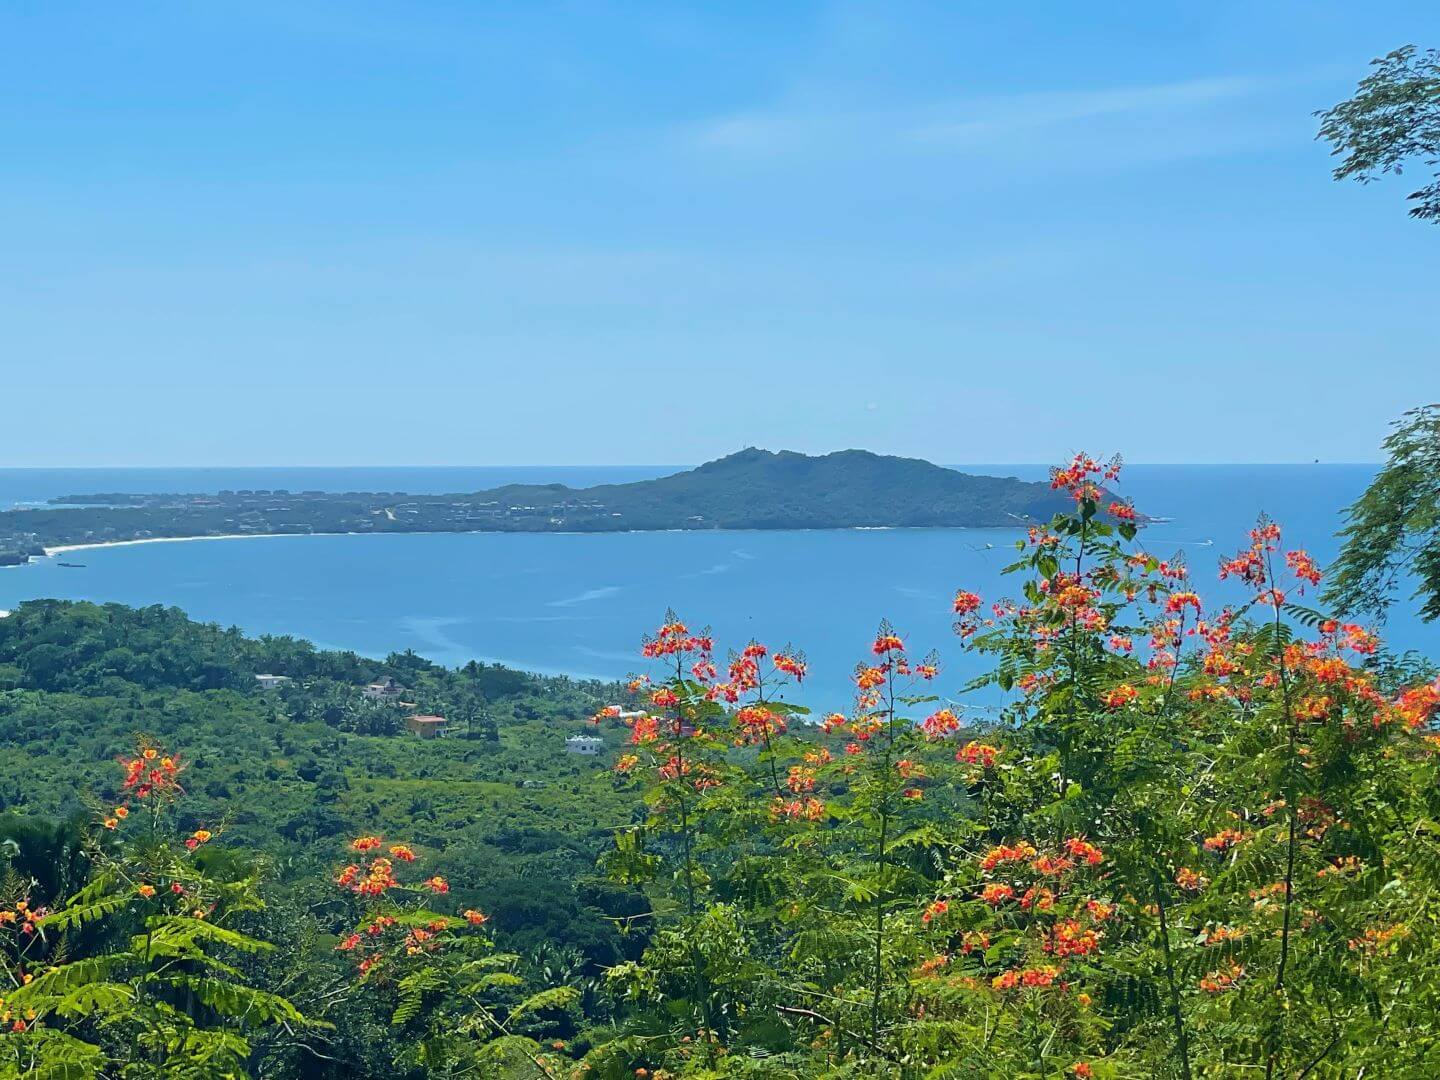 Hiking Monkey Mountain: One of the Best Activities in Riviera Nayarit